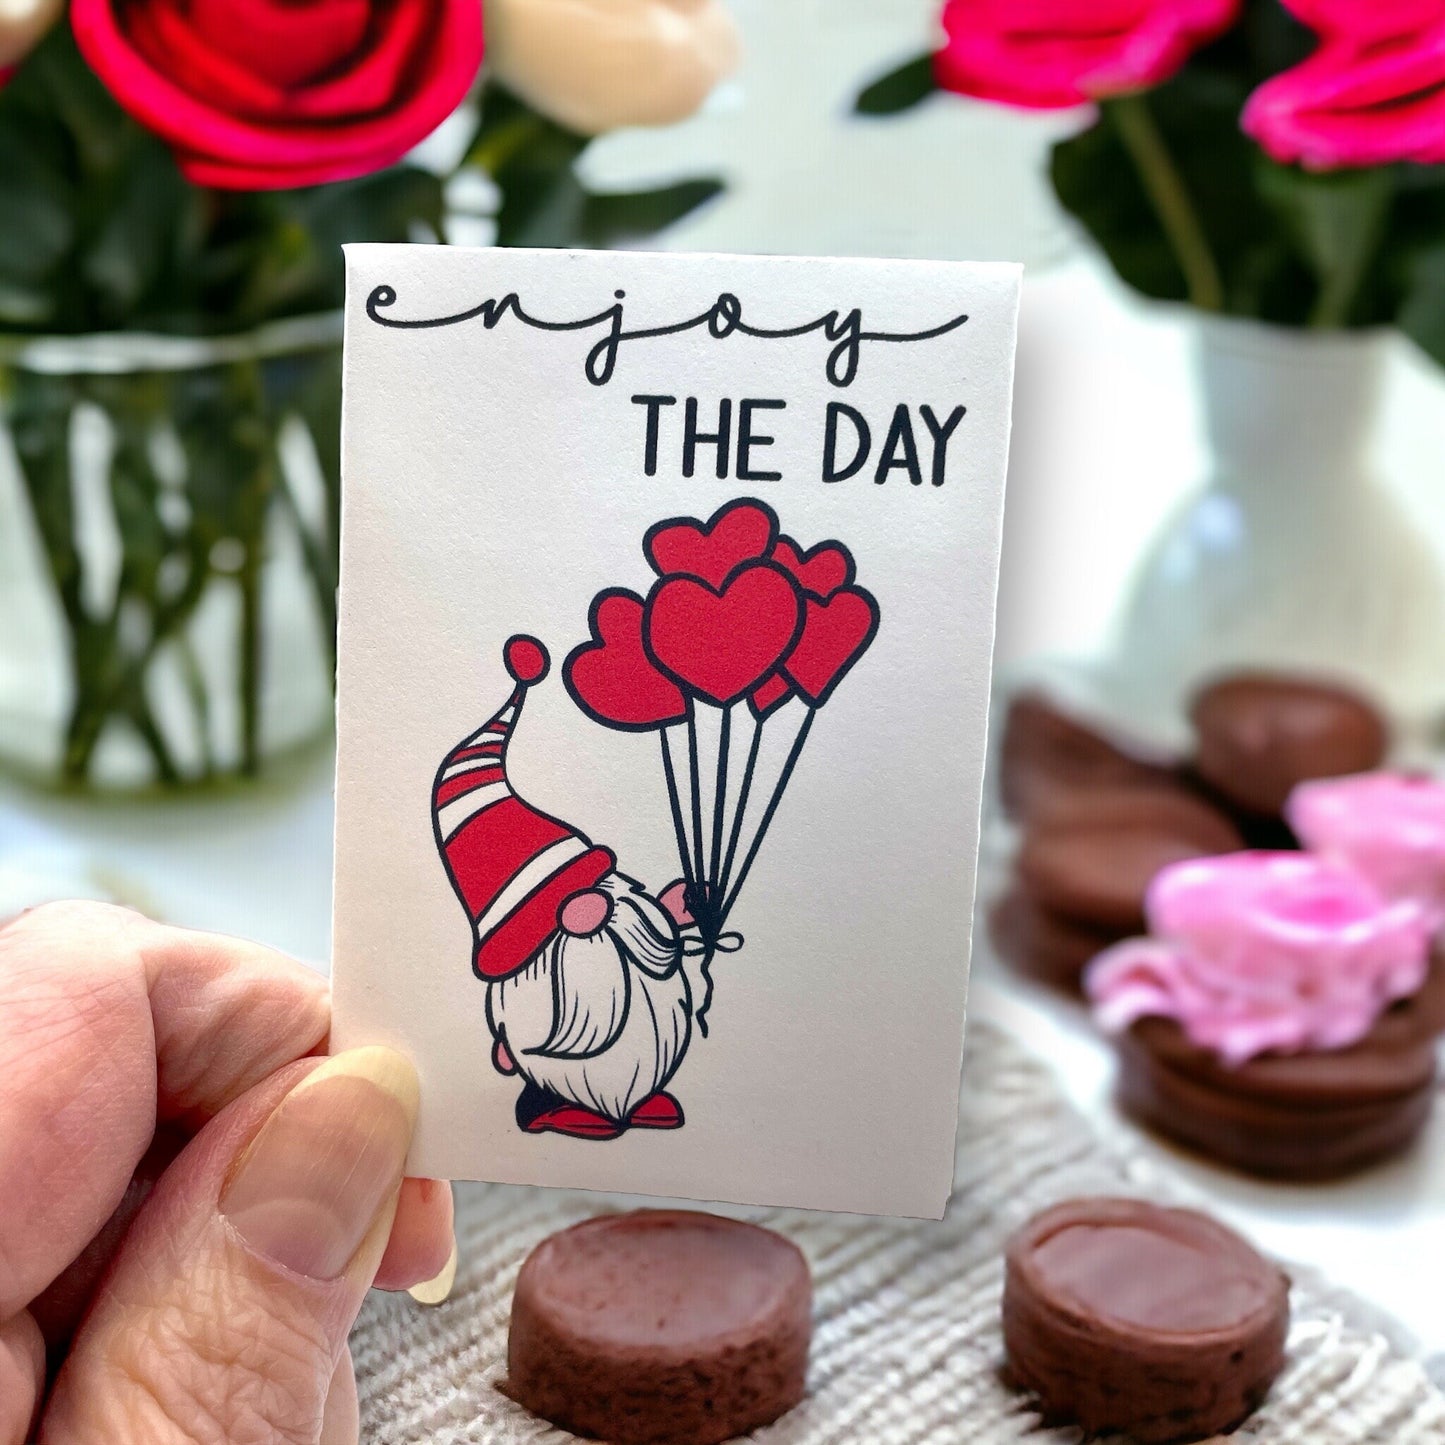 Seed Packages - Valentine’s Day seed package with poppies